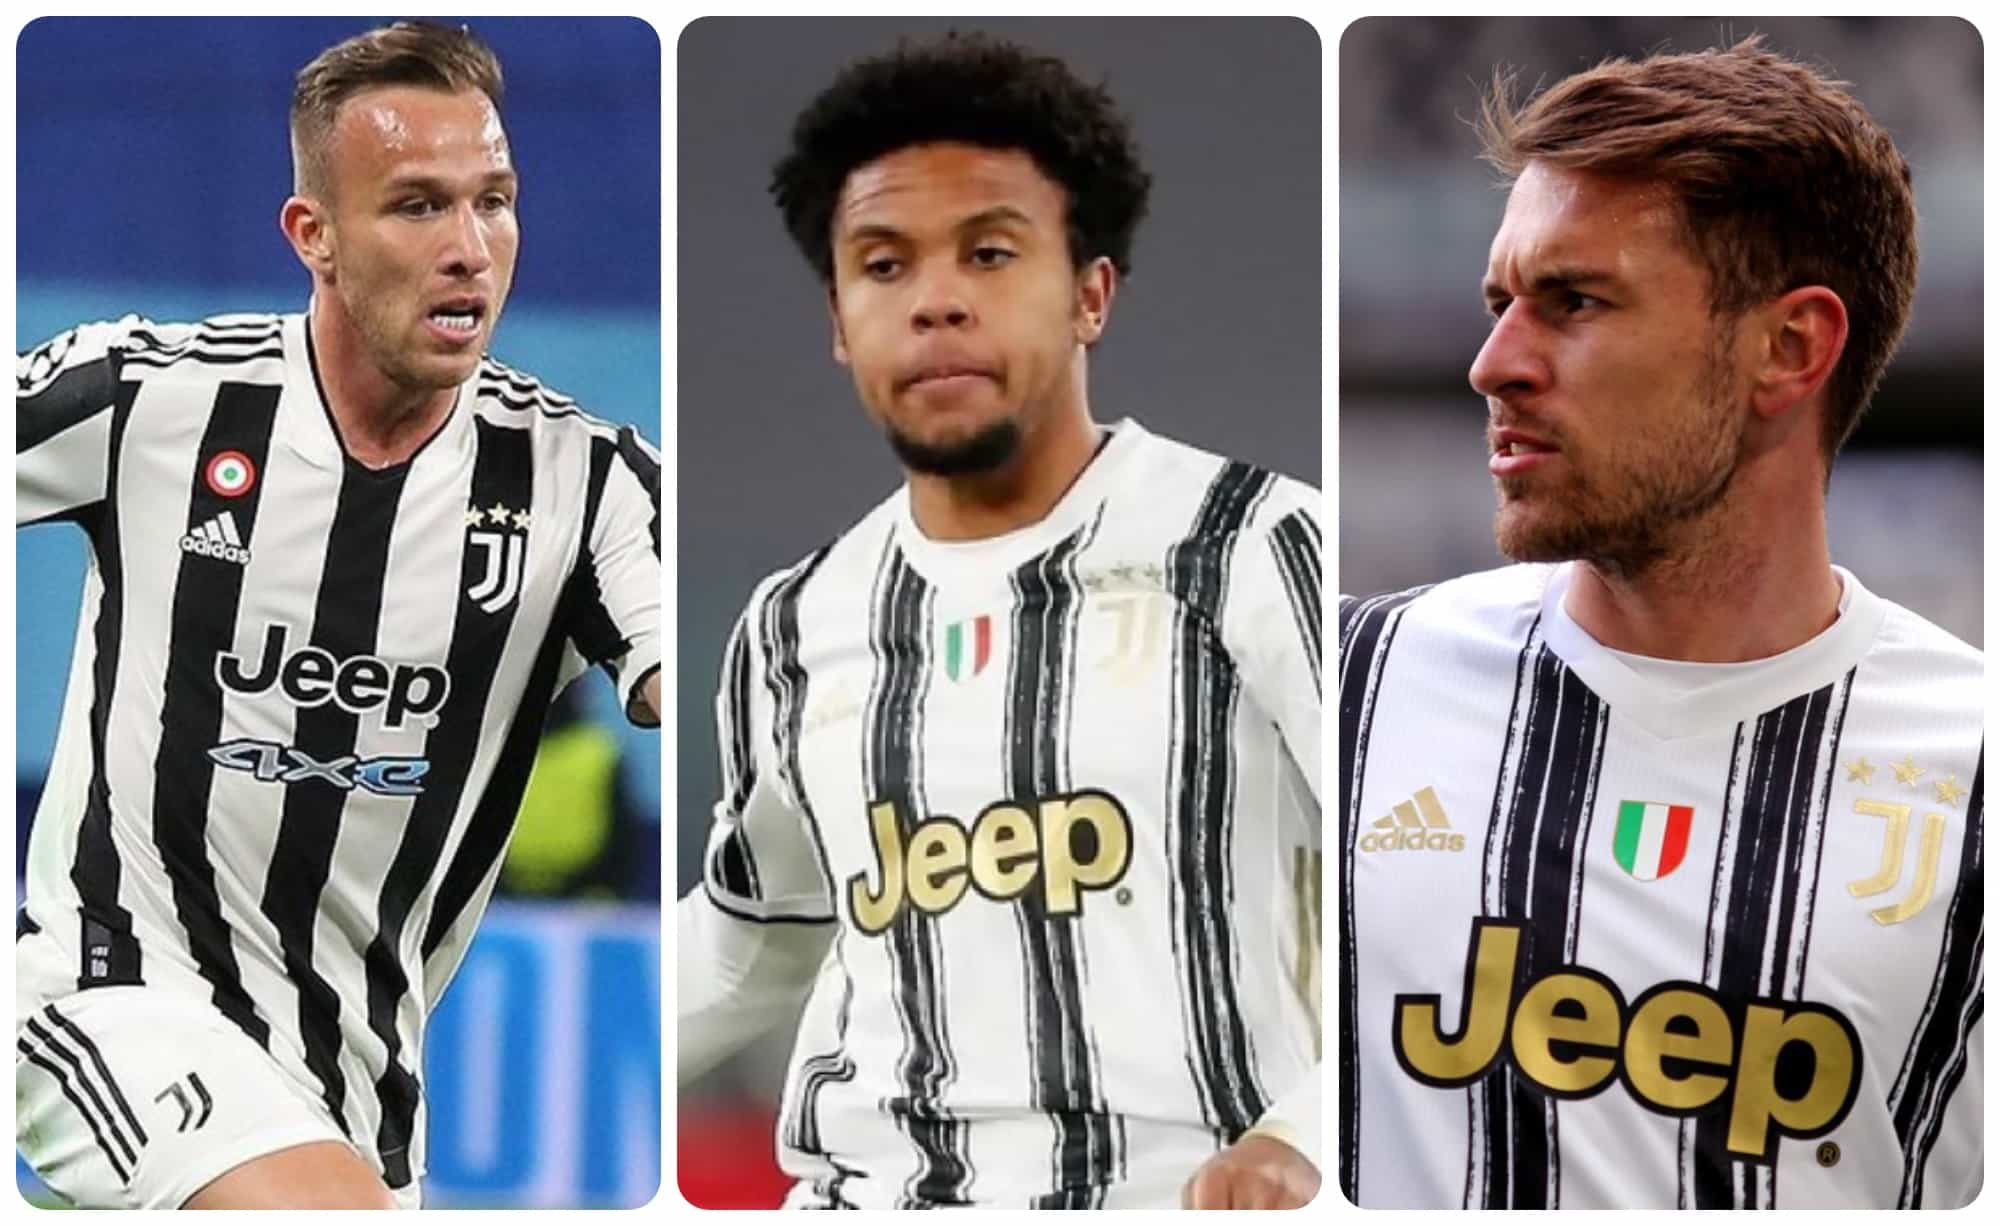 Juventus Wants to Overhaul The Midfield After Poor Champions League Performance